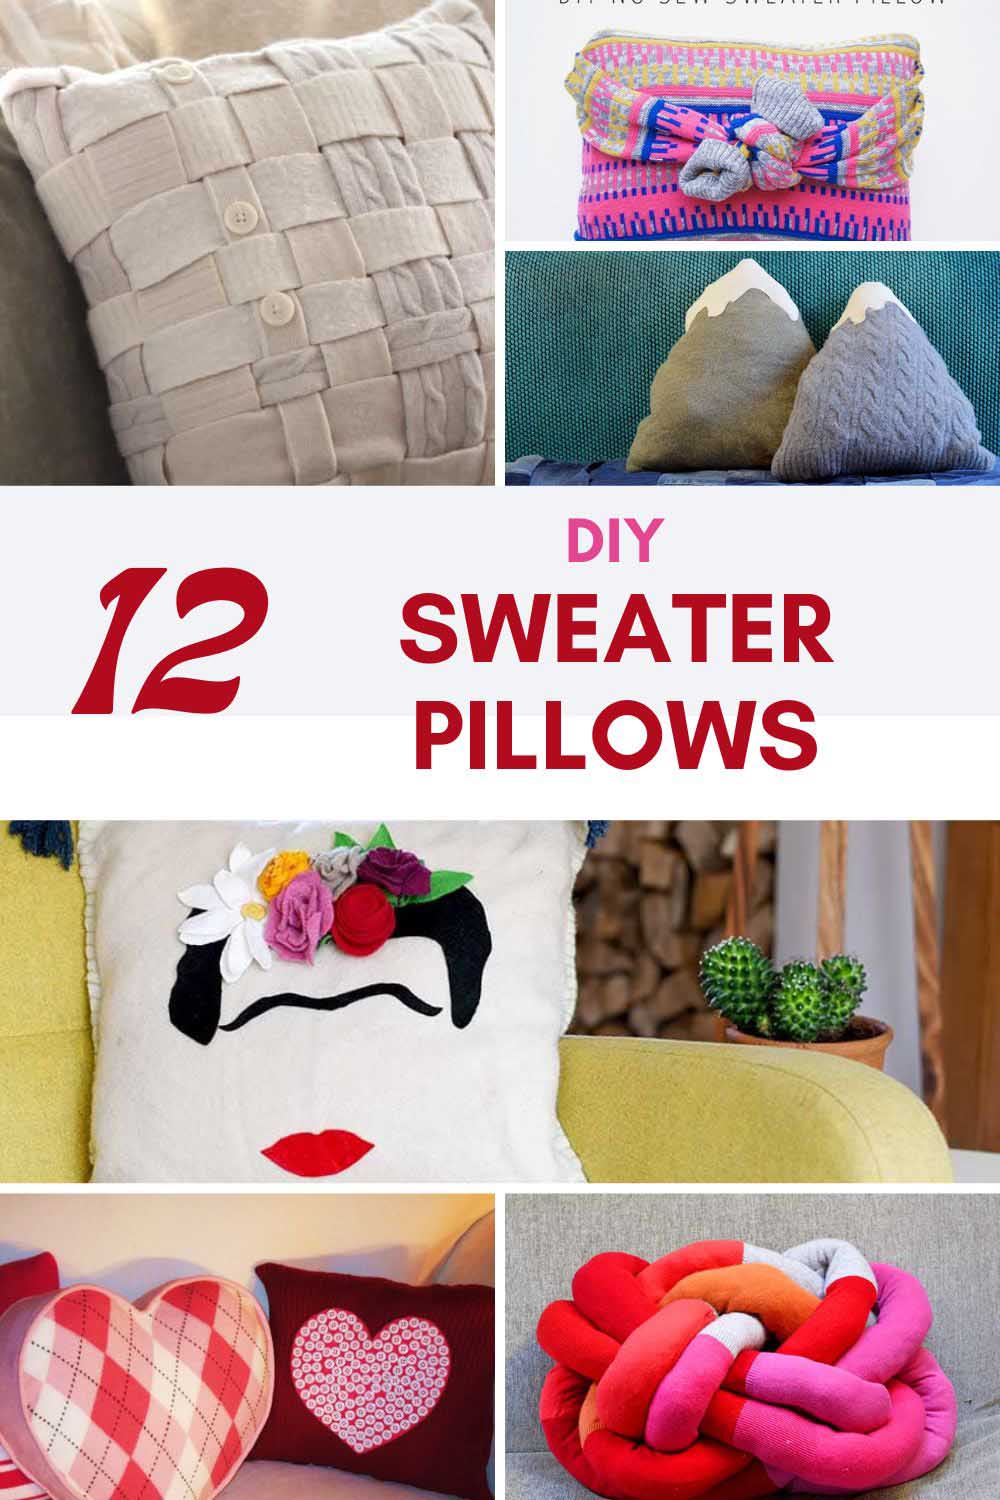 12 upcycled sweater pillows patterns and ideas